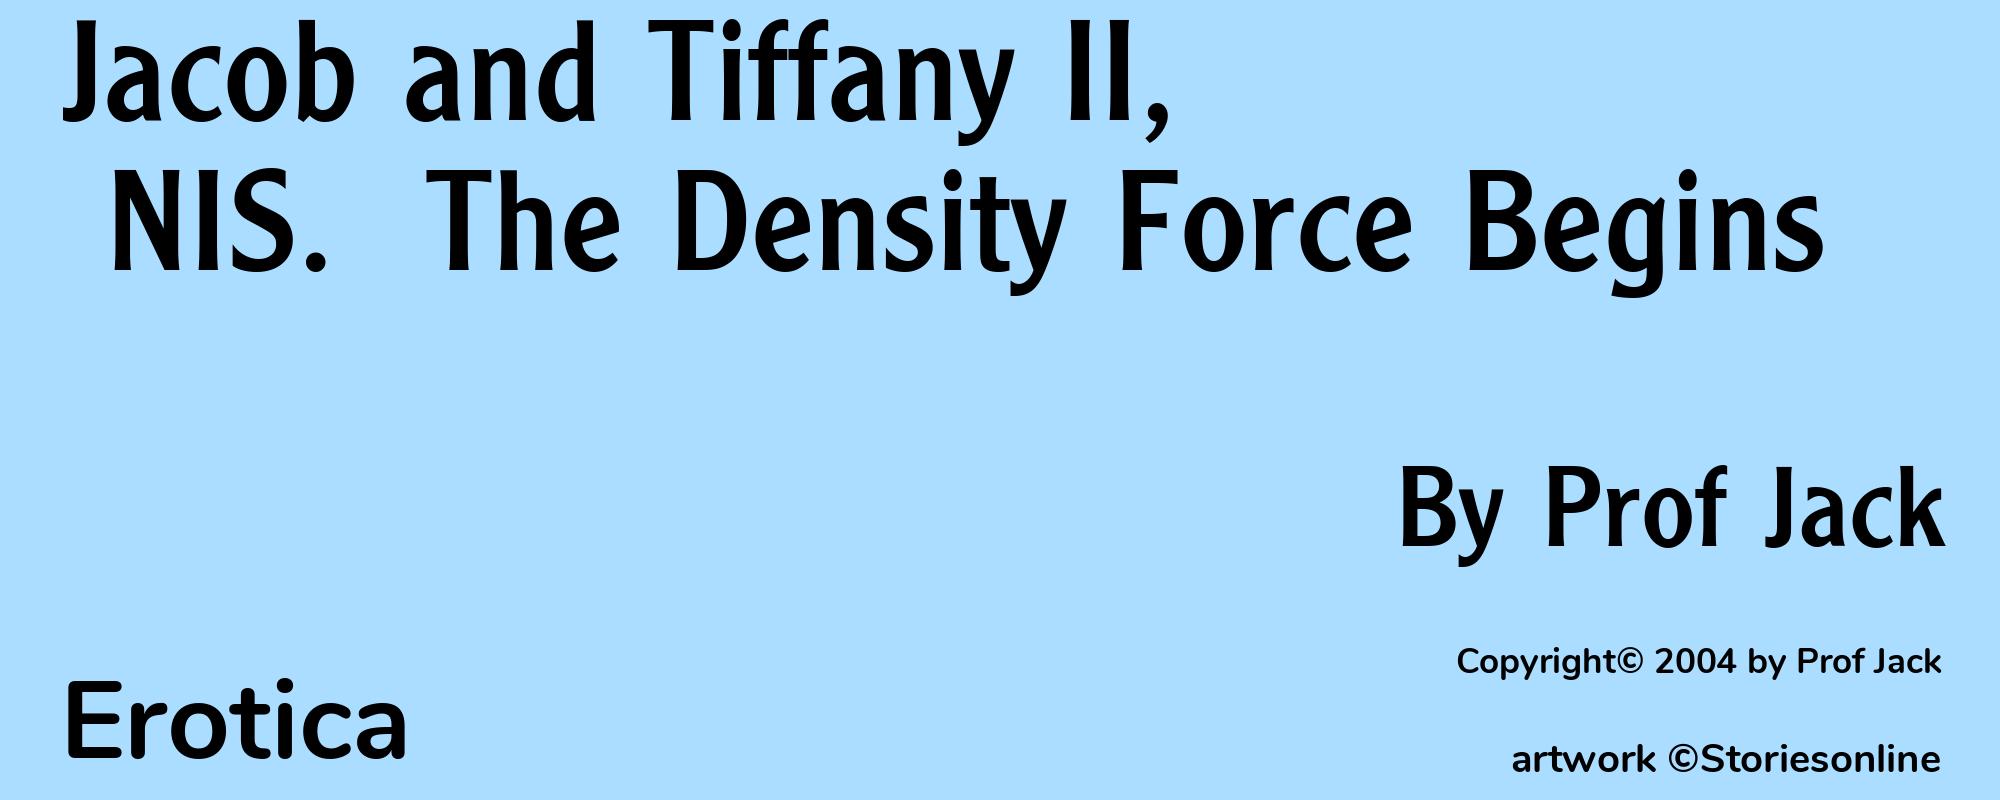 Jacob and Tiffany II, NIS.  The Density Force Begins - Cover